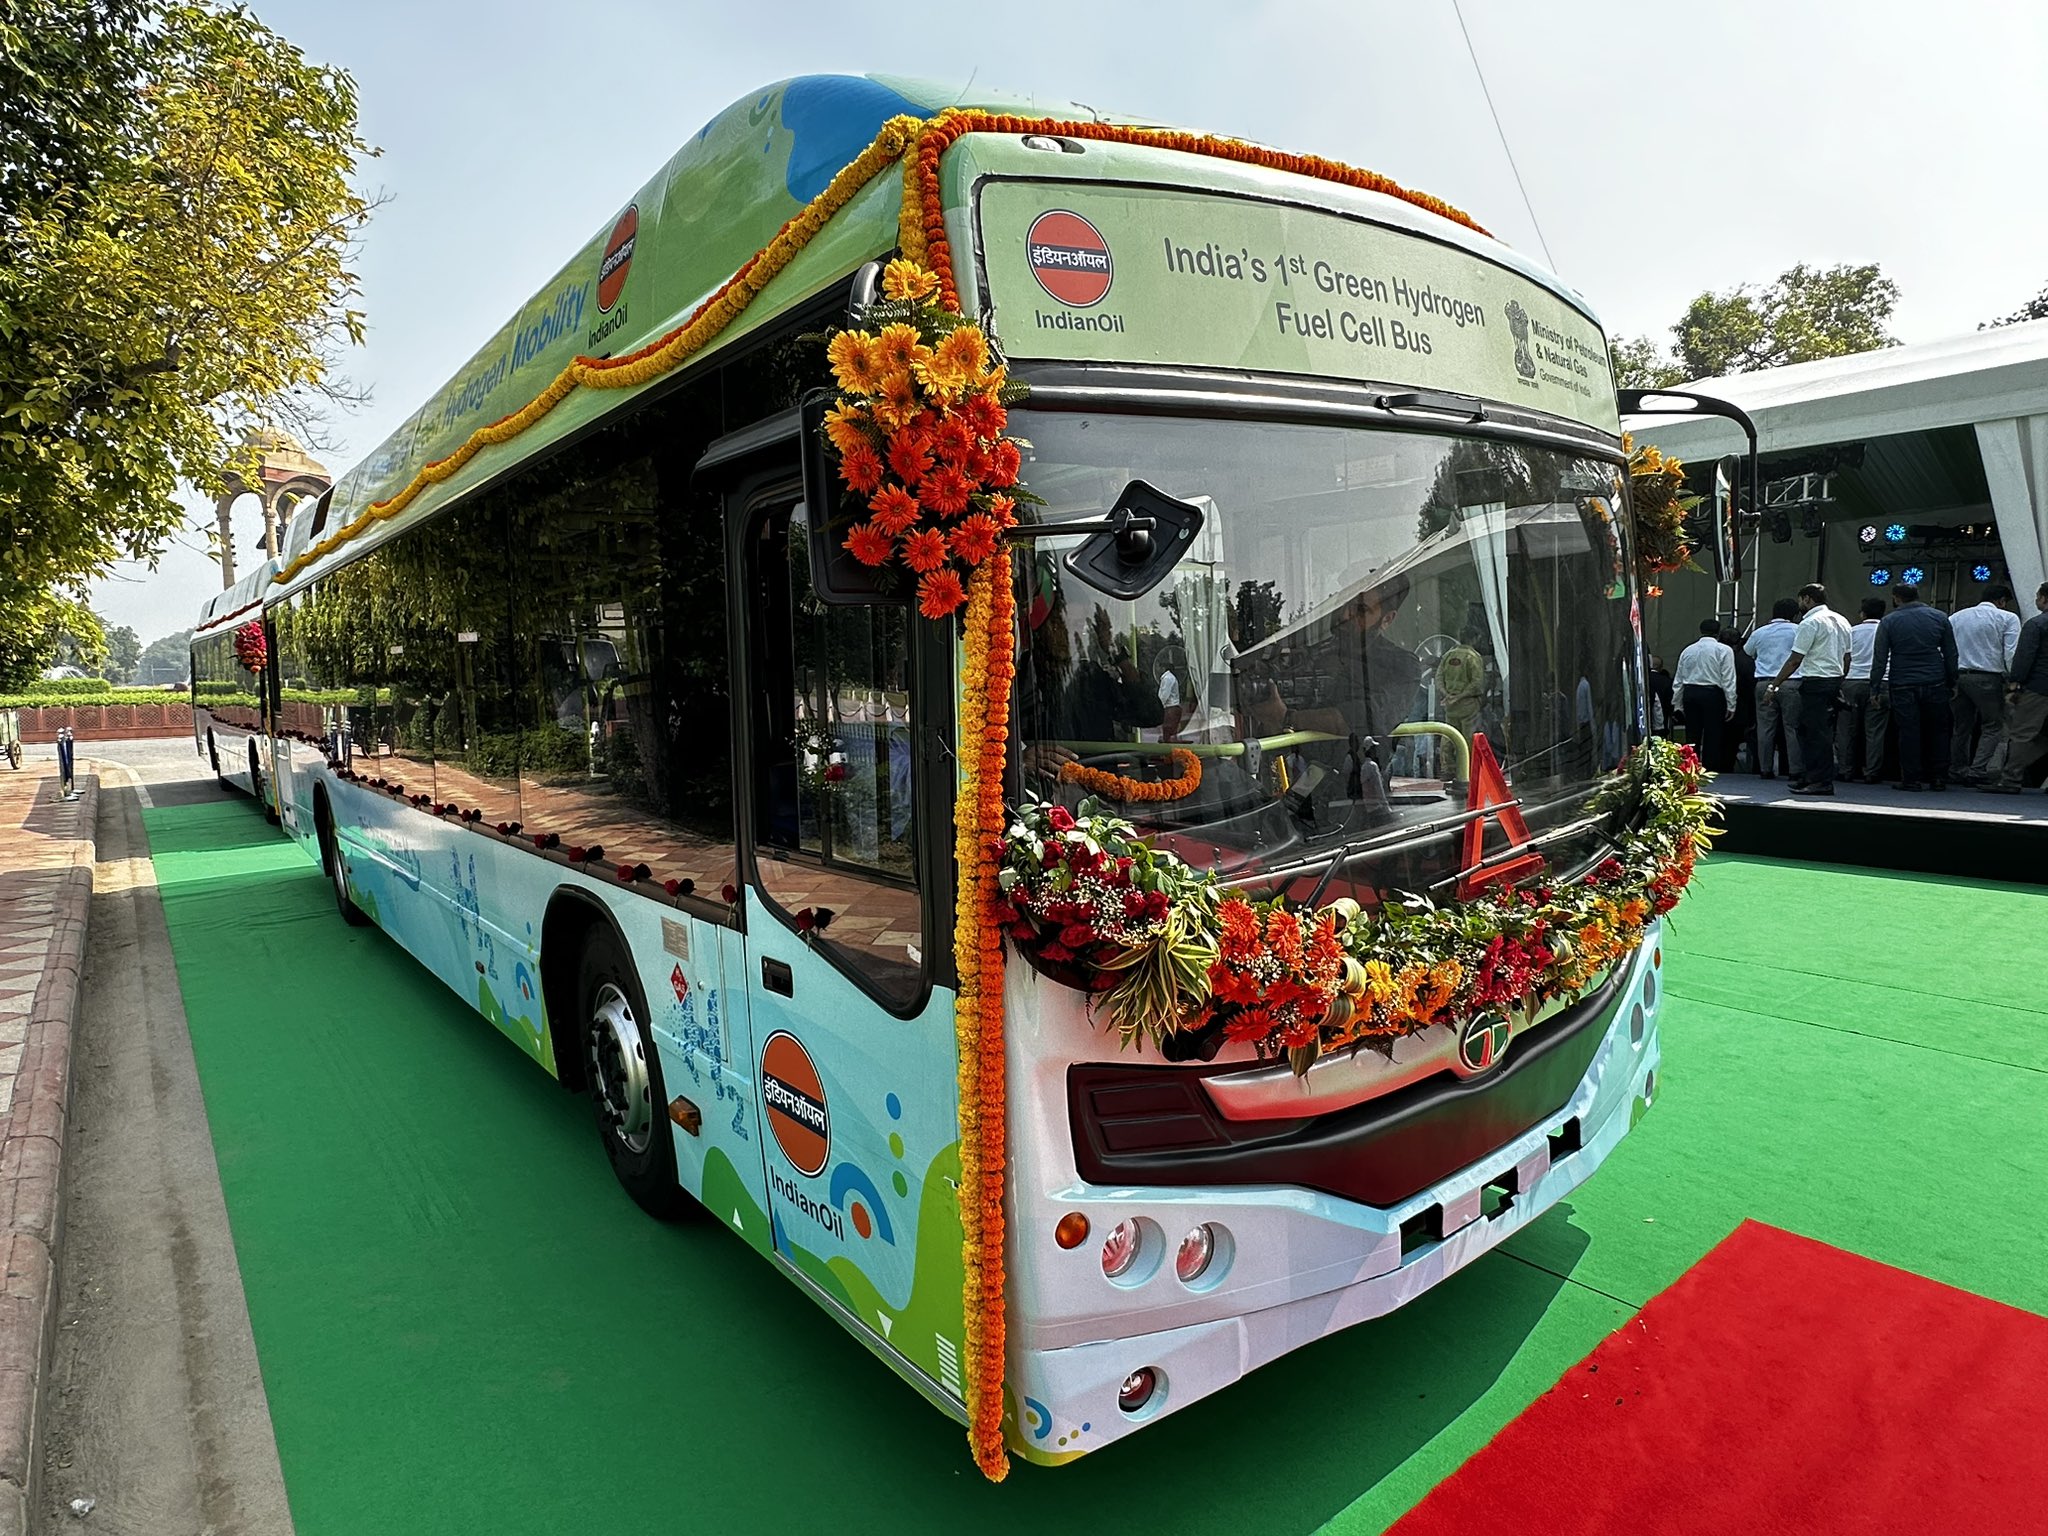 India flags off its first green hydrogen fuel cell bus